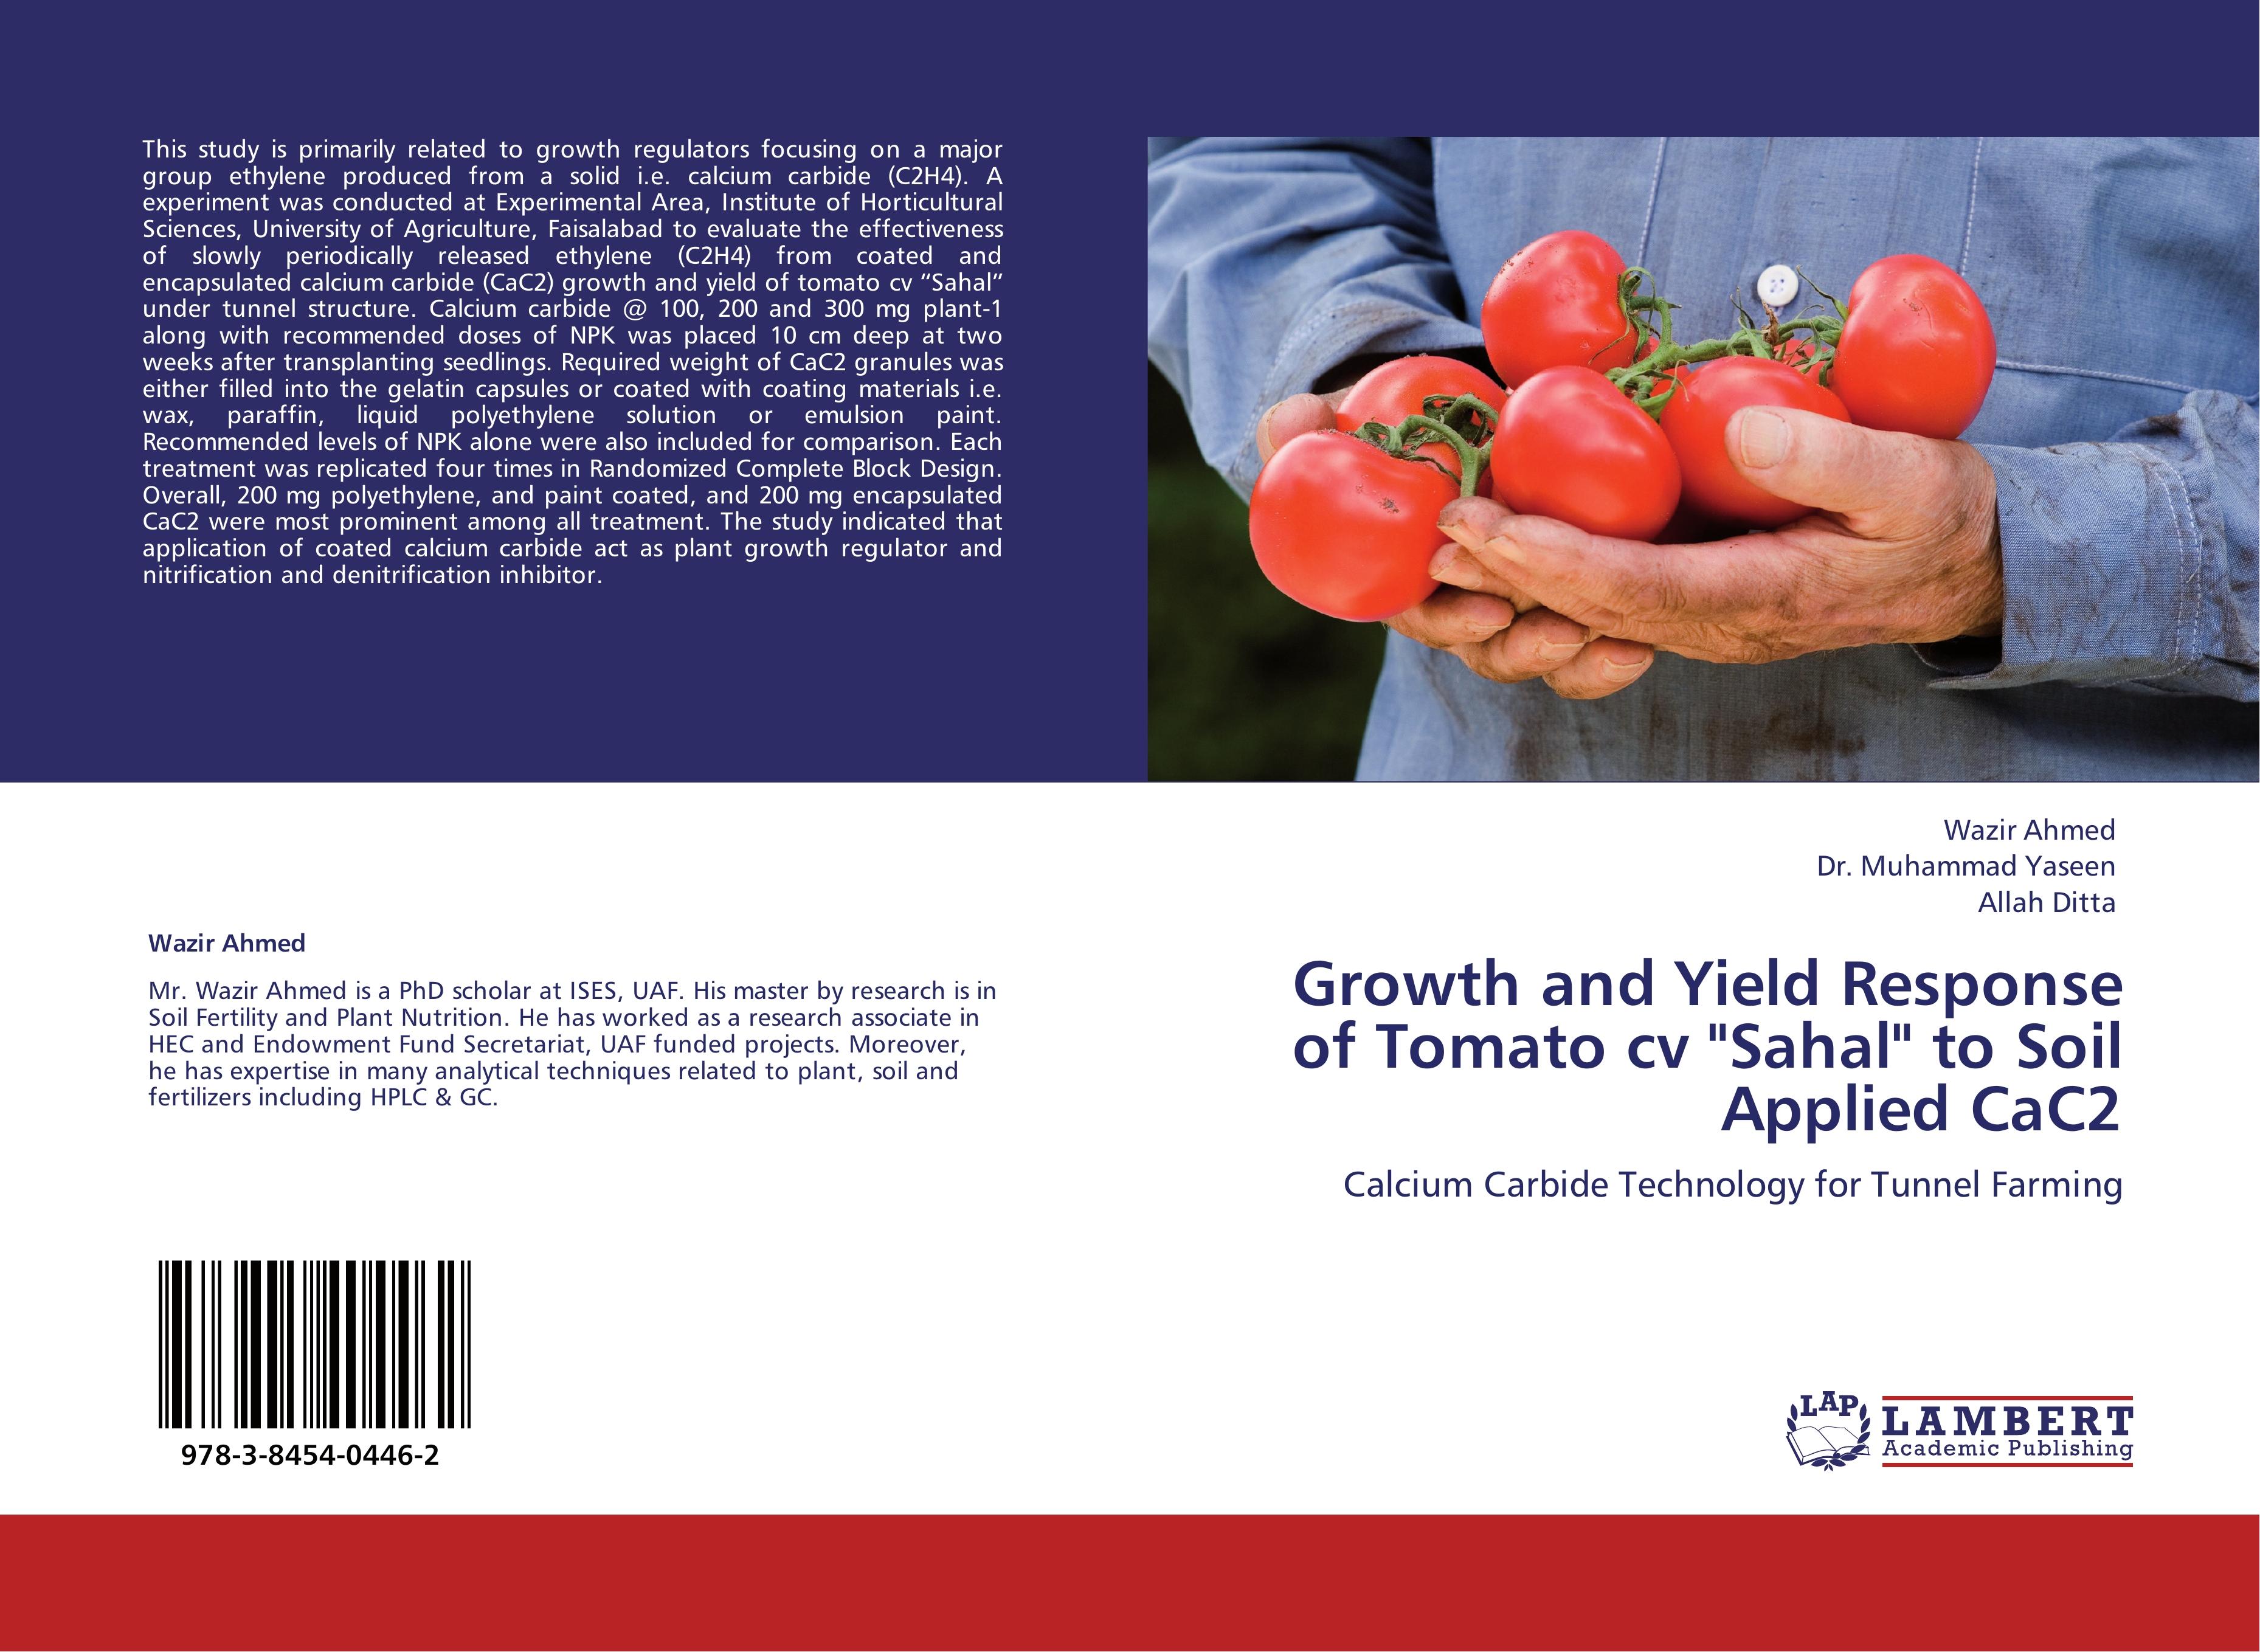 Growth and Yield Response of Tomato cv  Sahal  to Soil Applied CaC2 - Wazir Ahmed Dr. Muhammad Yaseen Allah Ditta